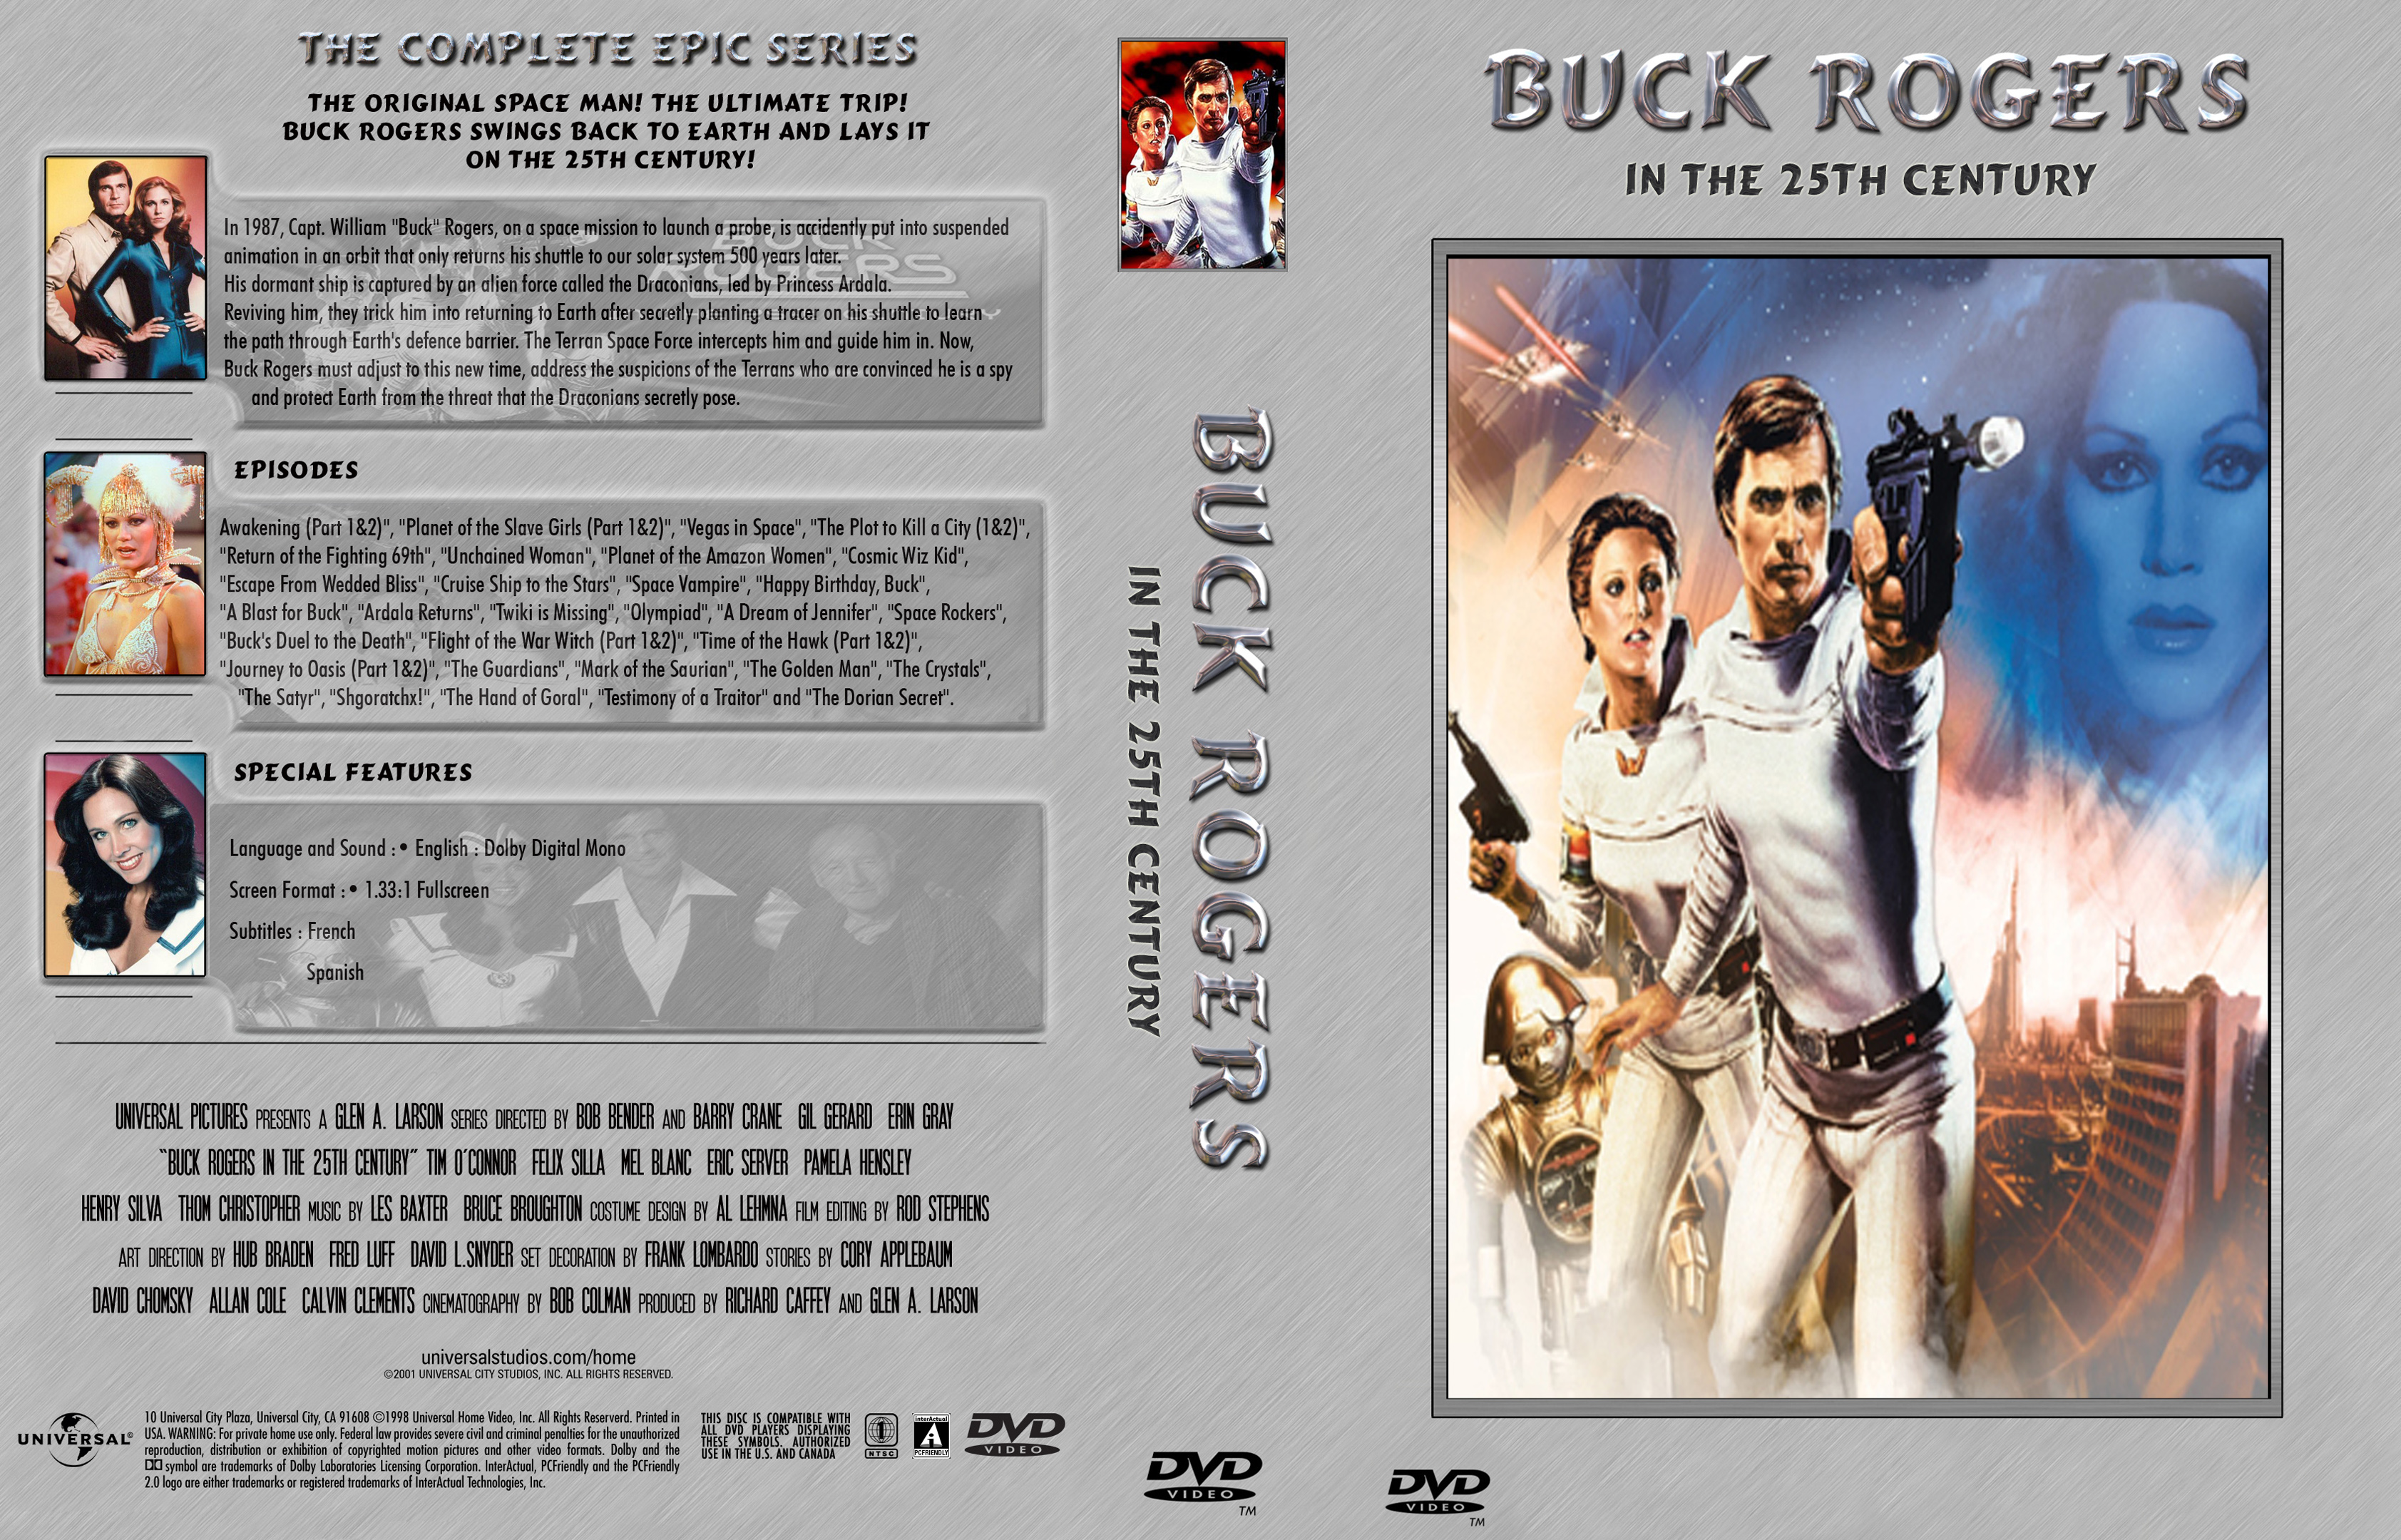 B - Buck Roger In The 25th Century - The Complete Epic Series r1.jpg